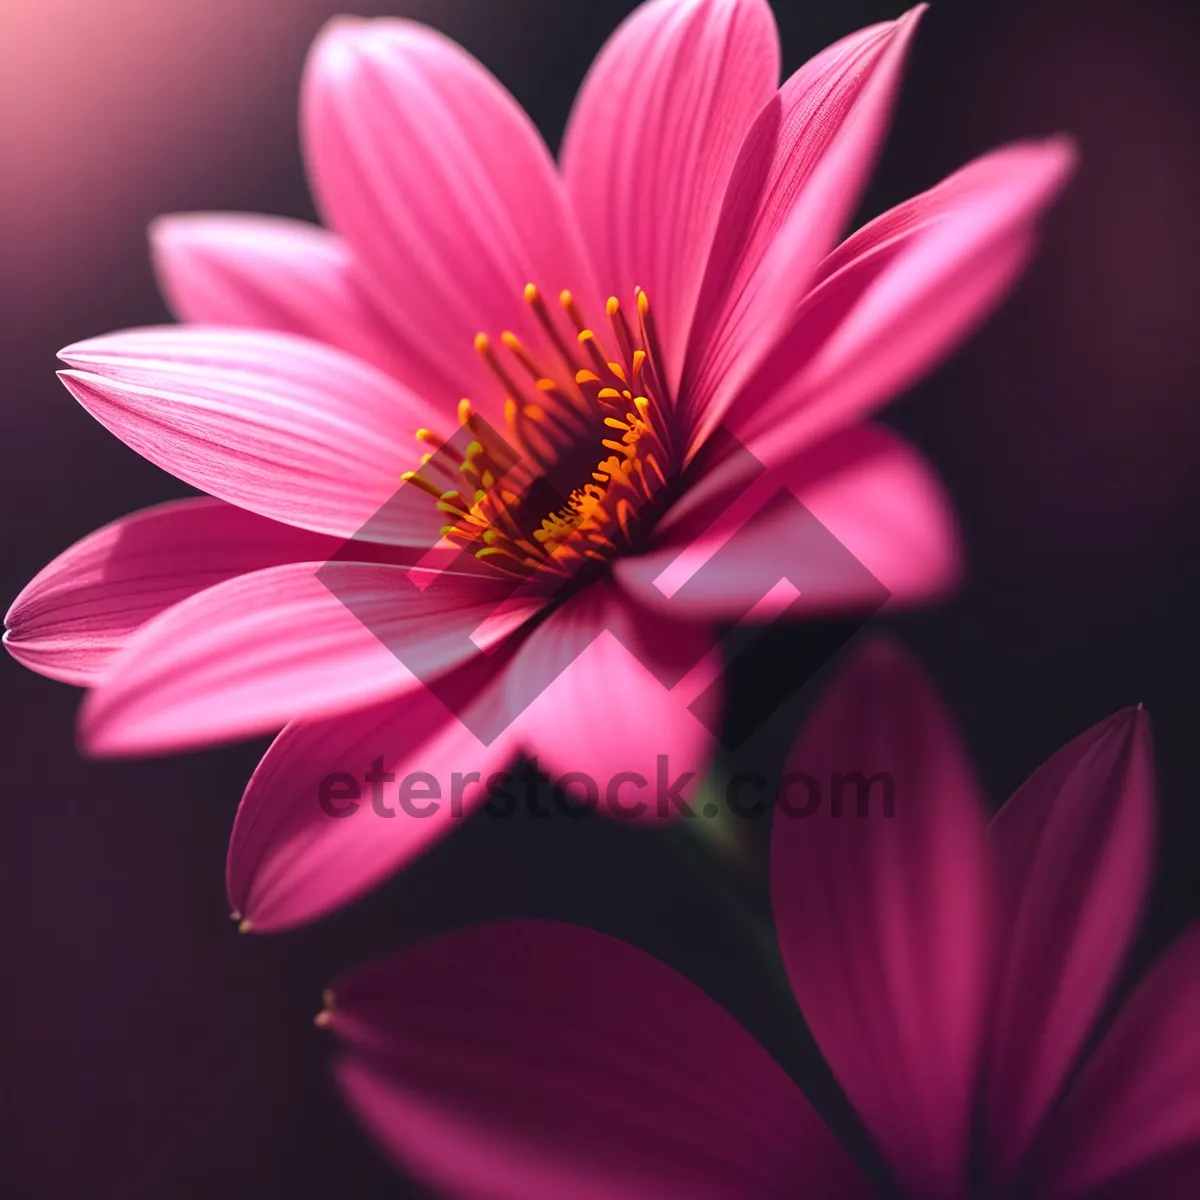 Picture of Vibrant Daisy Blossom in Pink and Yellow